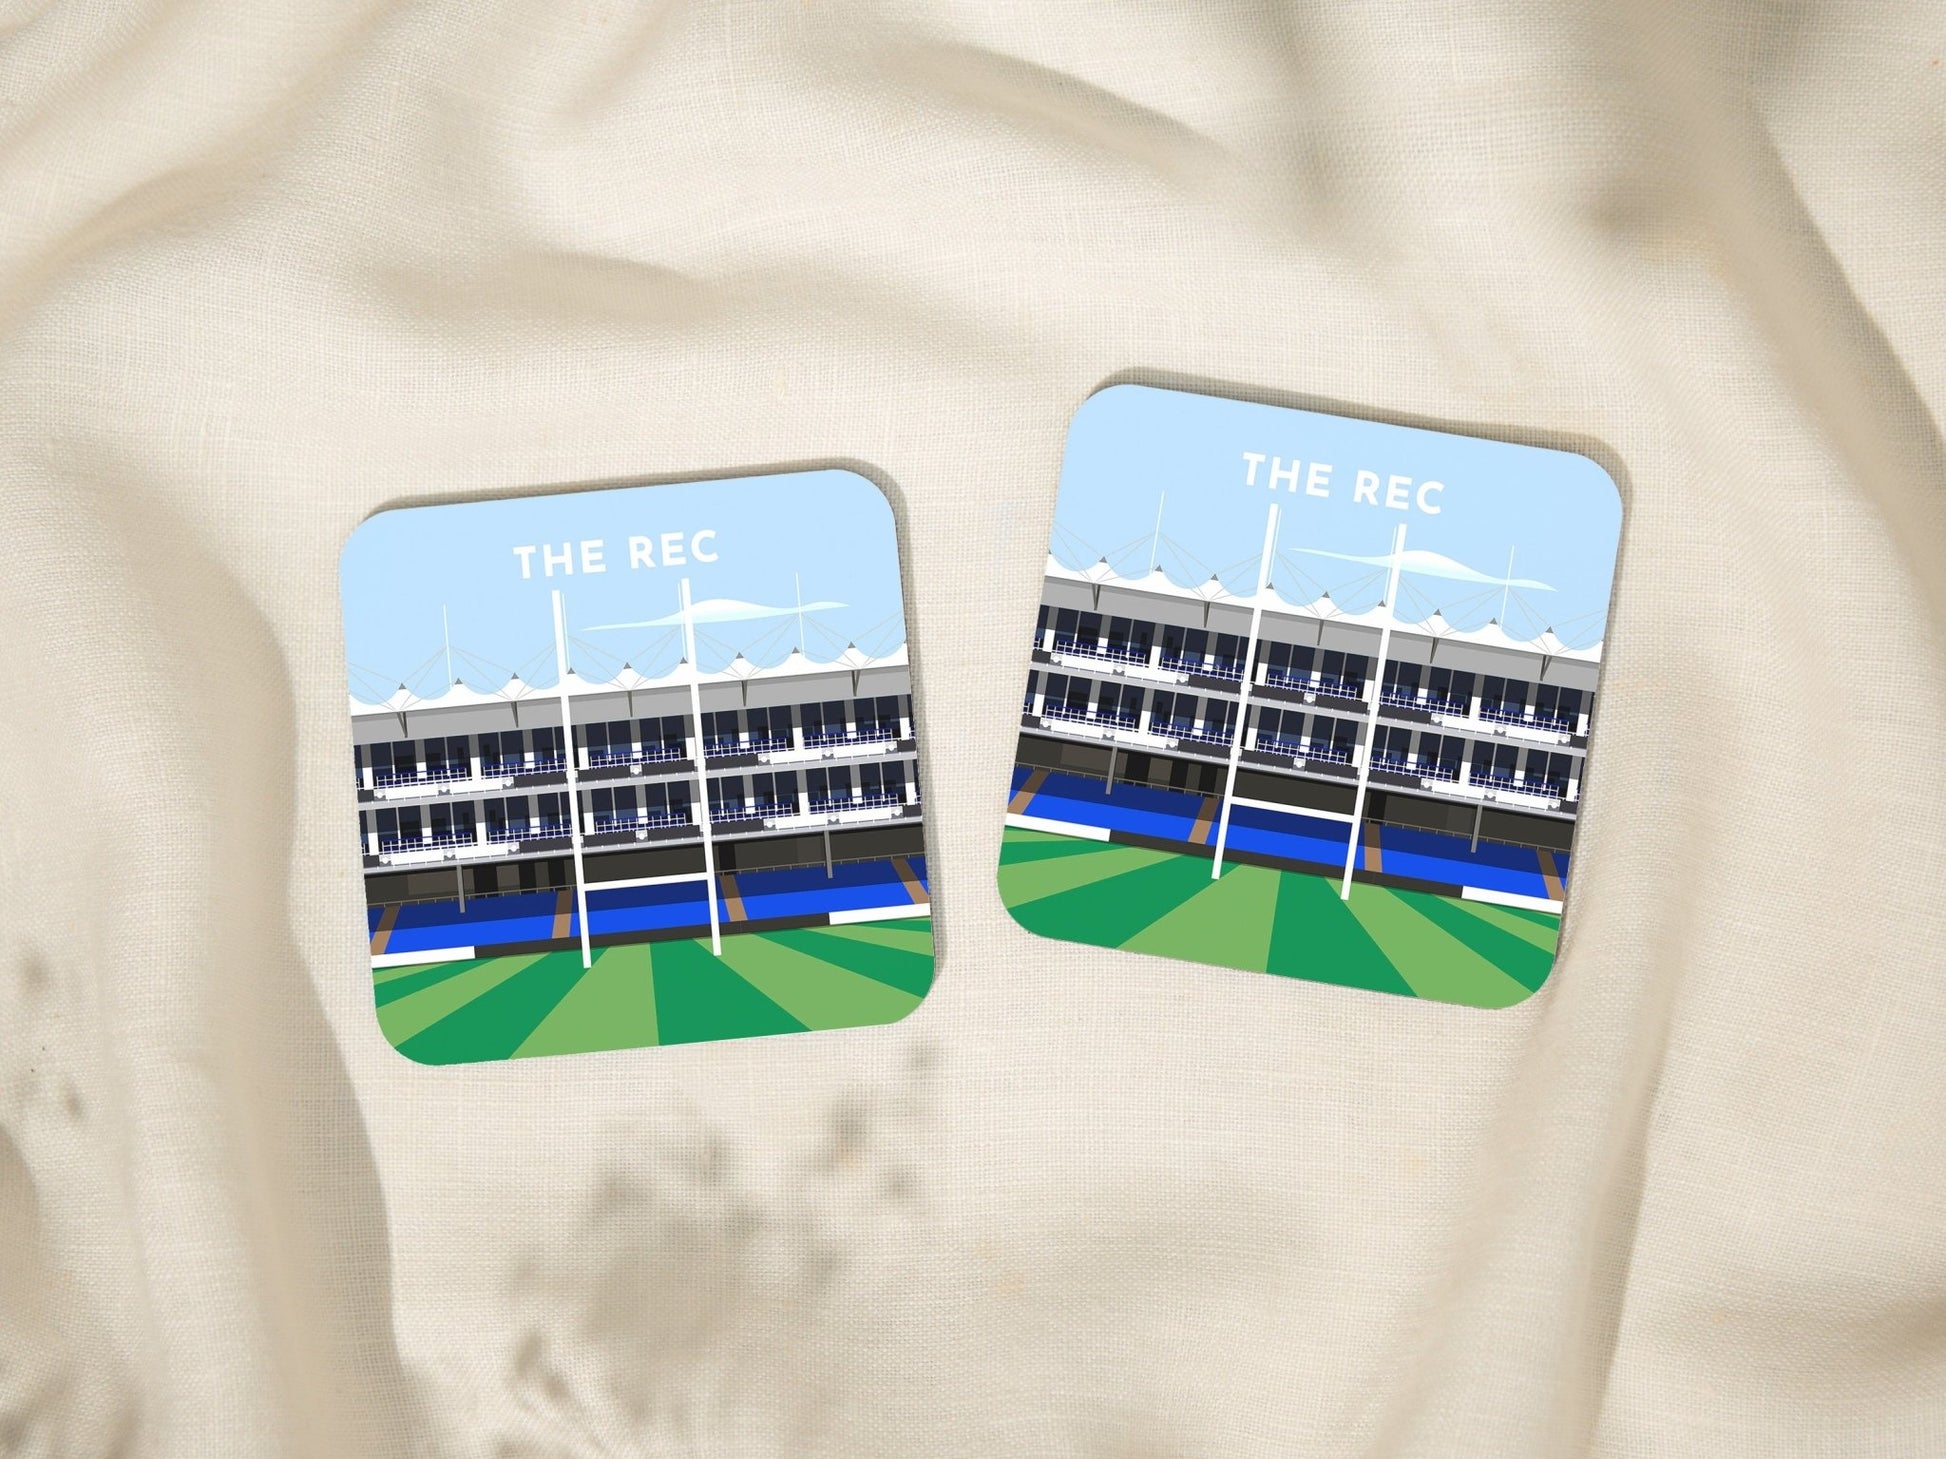 Bath Rugby Coaster Gift - The Rec Stadium Drinksware - Rugby Gifts for Dad Mum - Stocking Filler Gifts - Turf Football Art